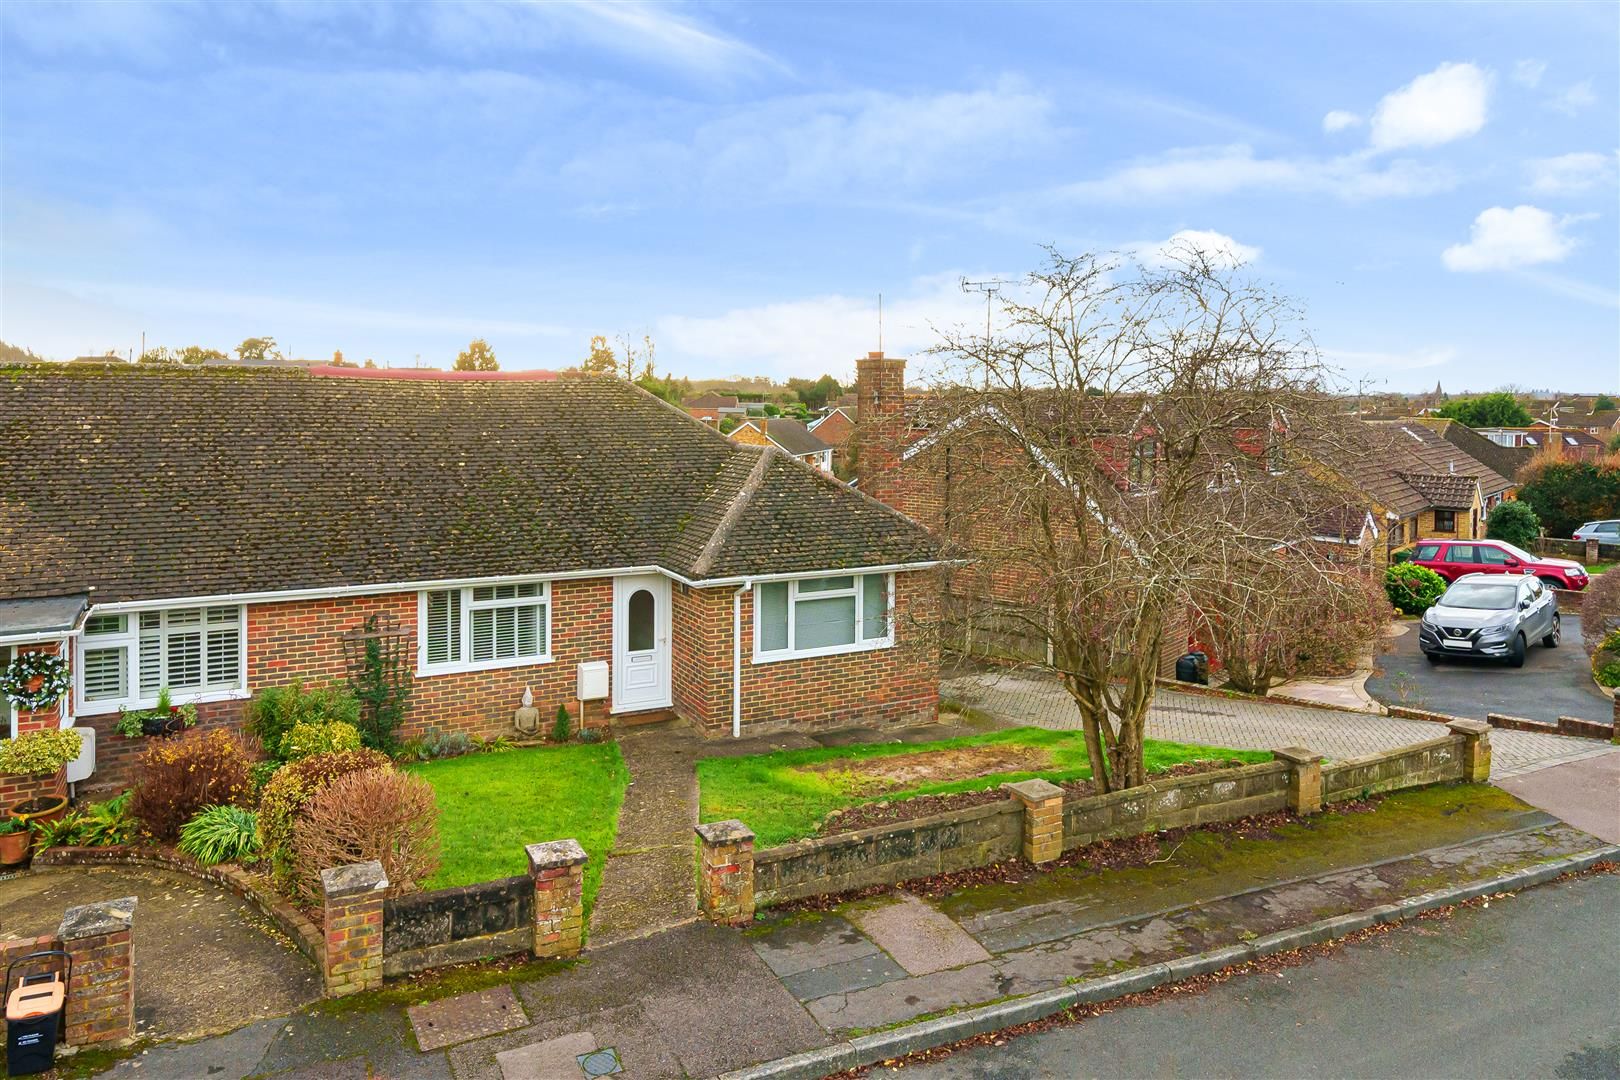 Copperfield Drive, Langley, Maidstone, Kent, ME17 1SY